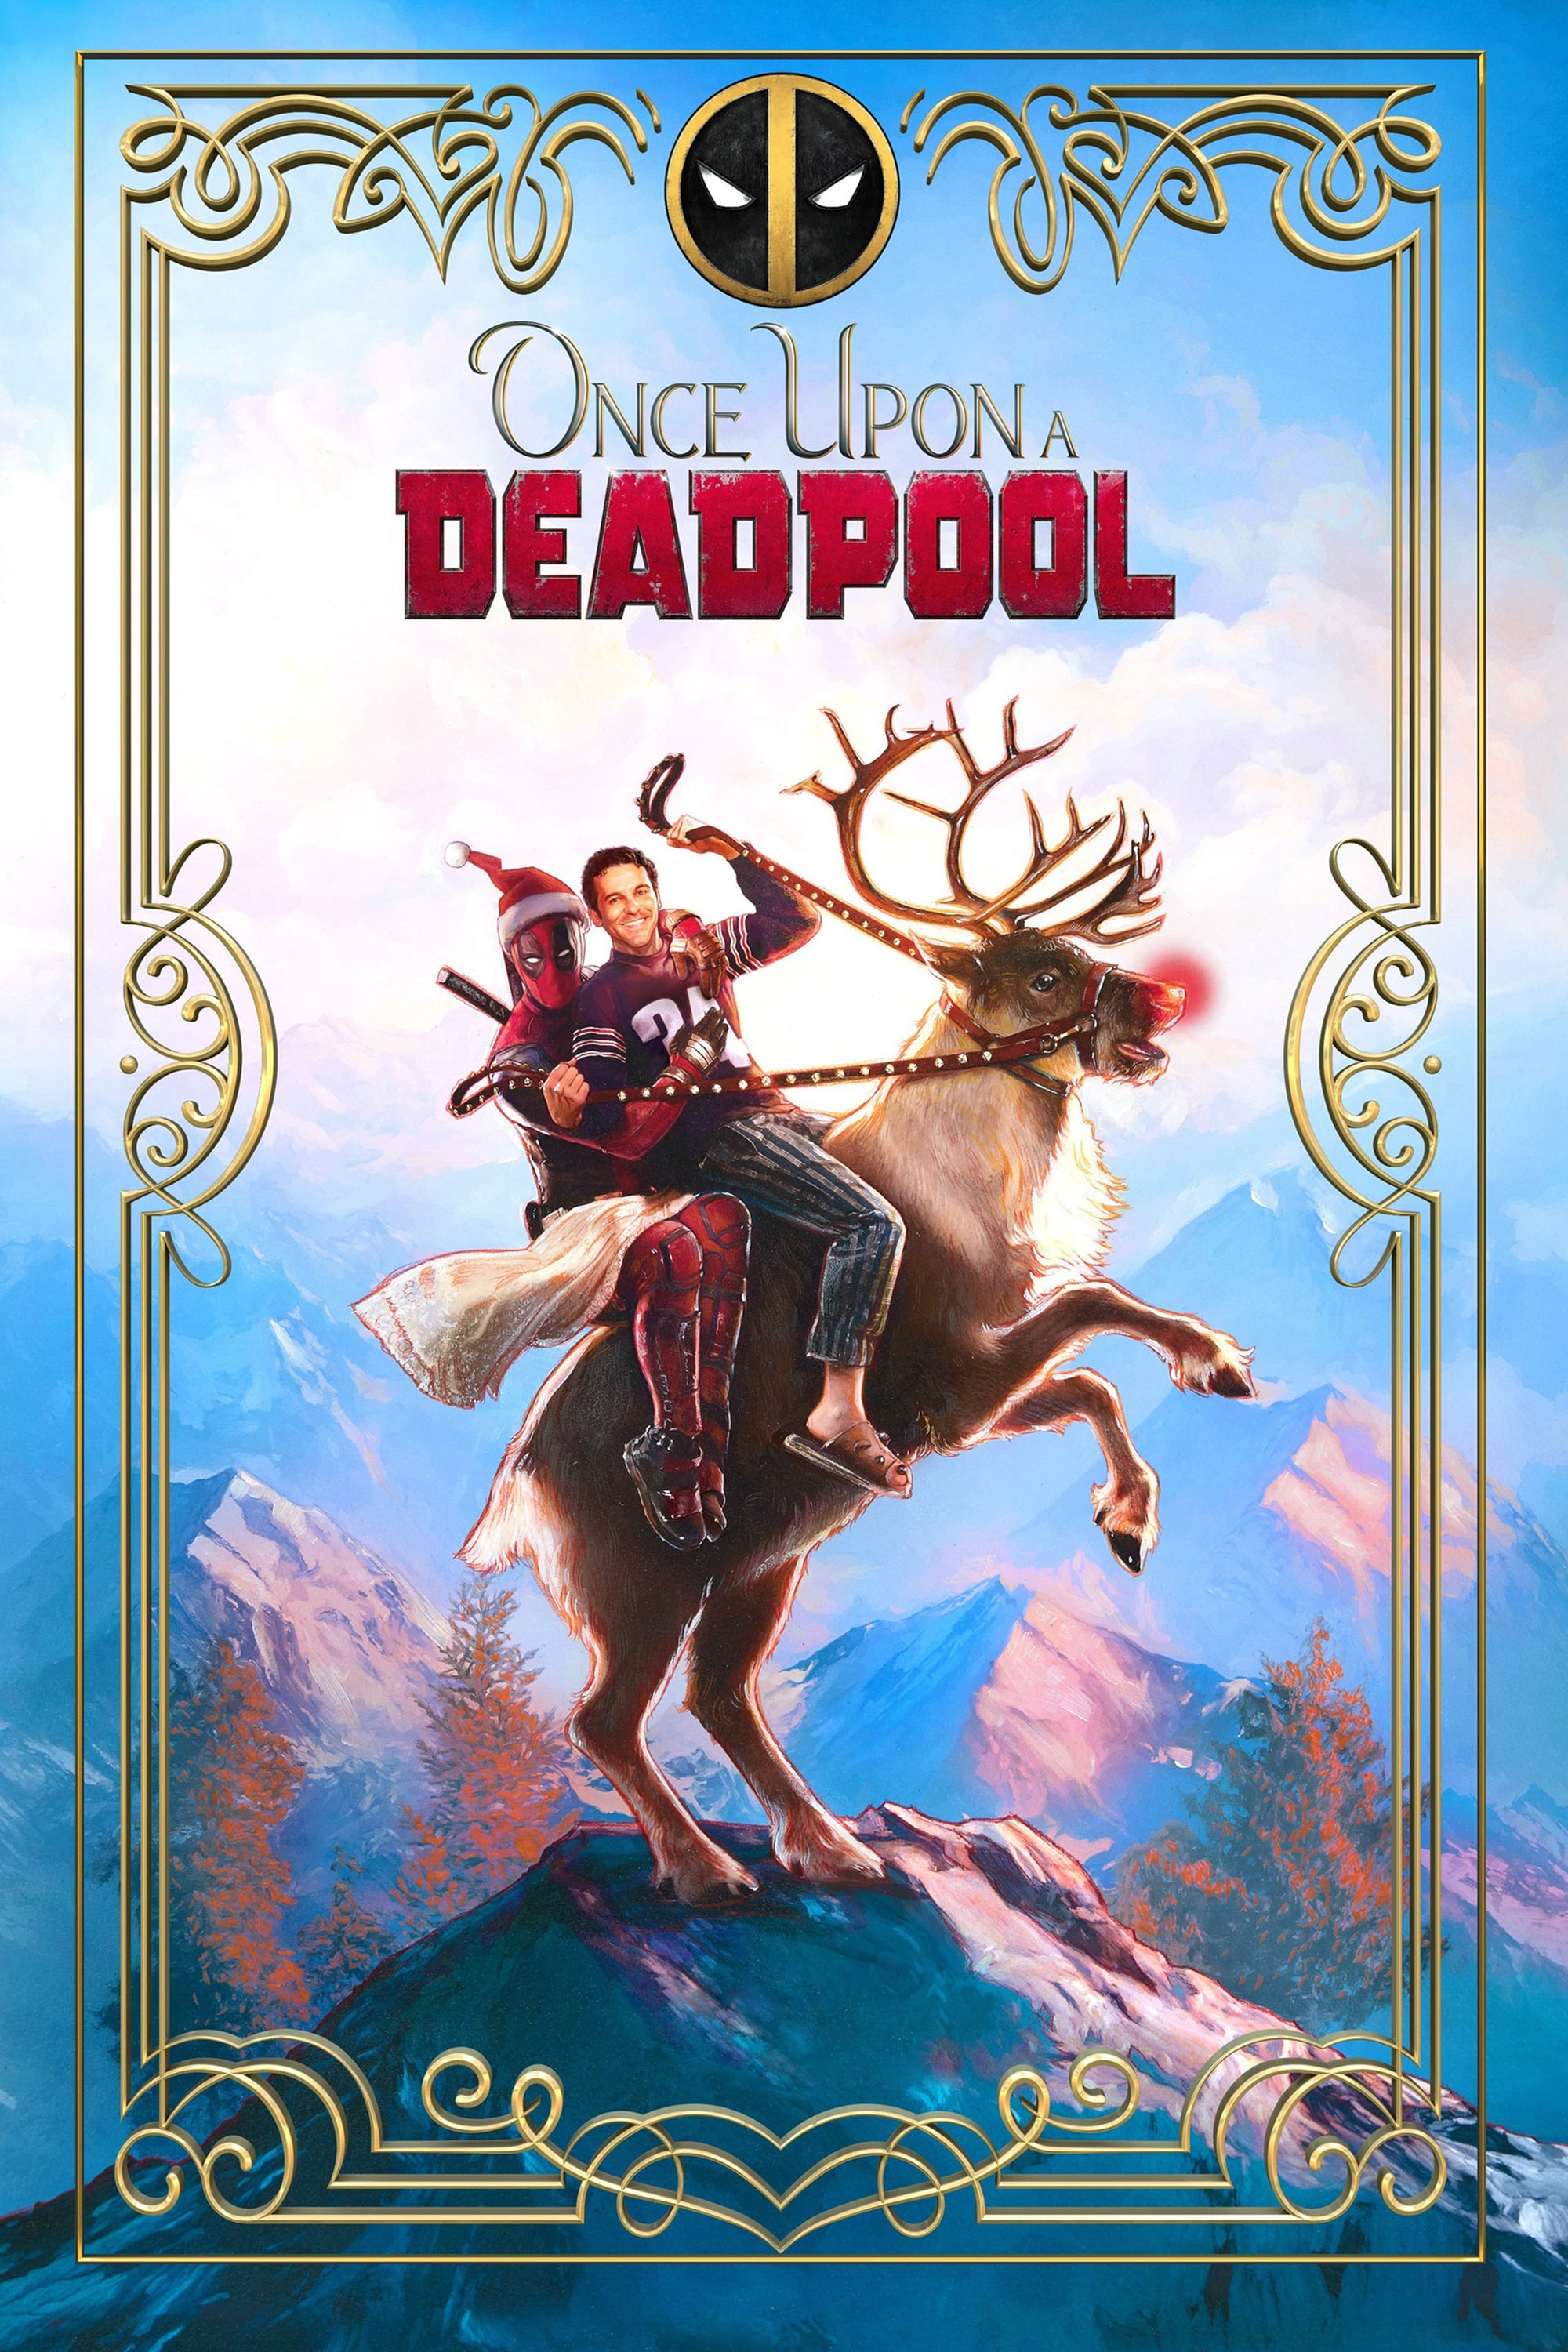 Poster for the movie "Once Upon a Deadpool"